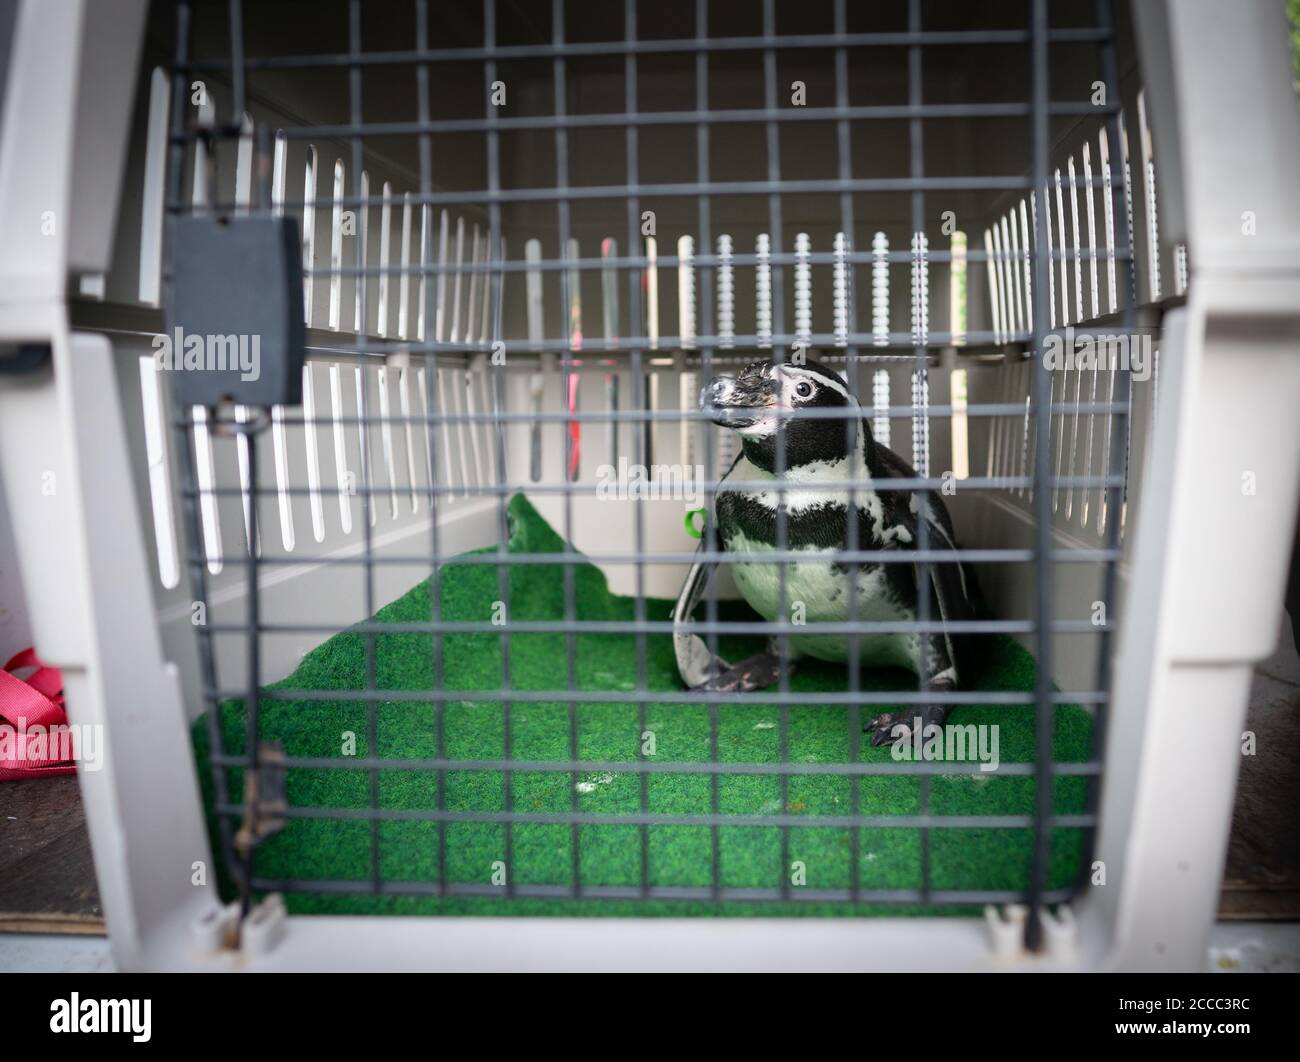 19 August 2020, Hessen, Frankfurt/Main: A Humboldt penguin looks out of its  transport crate after arriving at Frankfurt Zoo from Mannheim. 20 animals  had been brought in the morning from the Luisenpark